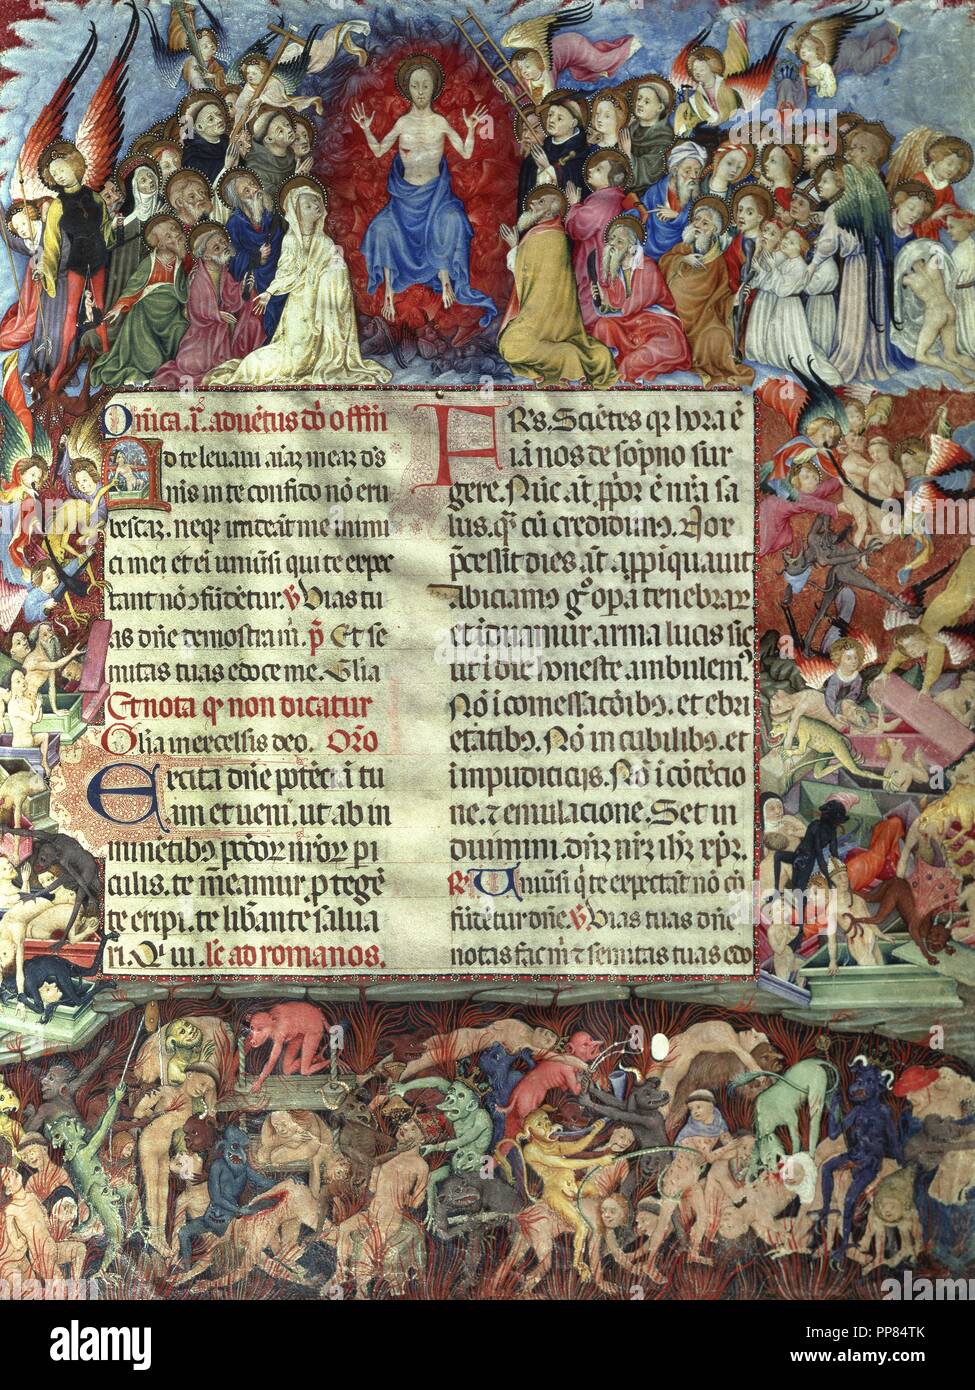 Missal. of St. Eulalia. Liturgical book, C. 1403. By Rafael Destorrents (1375-15th century). 1st folio. Last Judgment. Archive of Barcelona Cathedral. Catalonia. Spain. Stock Photo